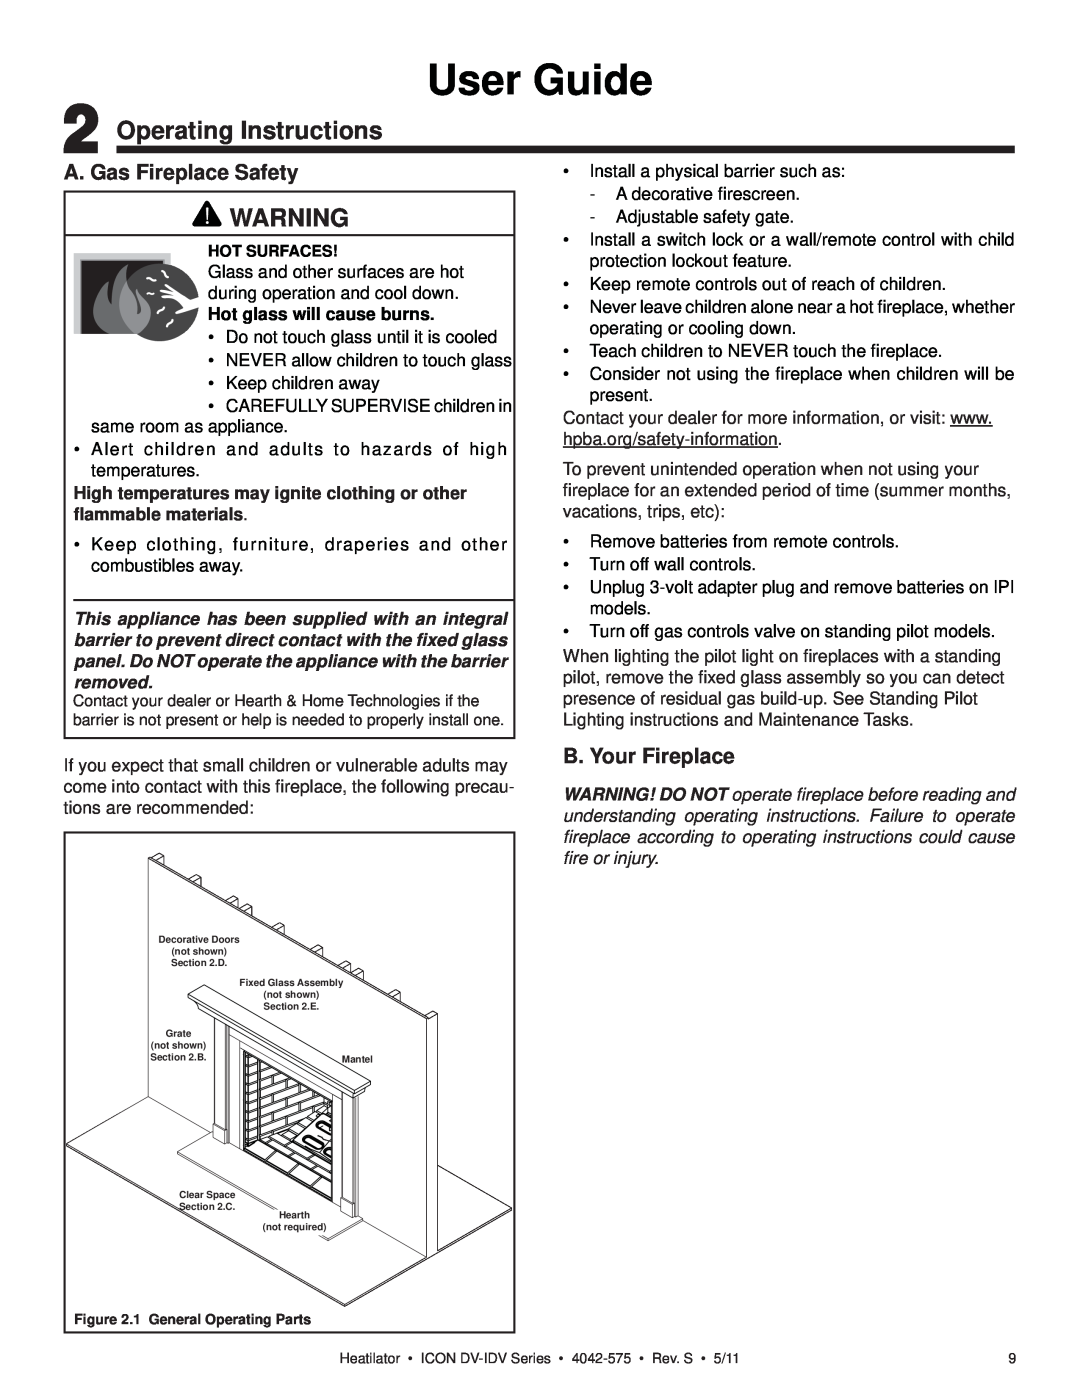 Heatiator IDV4833IT owner manual User Guide, Operating Instructions, A. Gas Fireplace Safety, B. Your Fireplace 